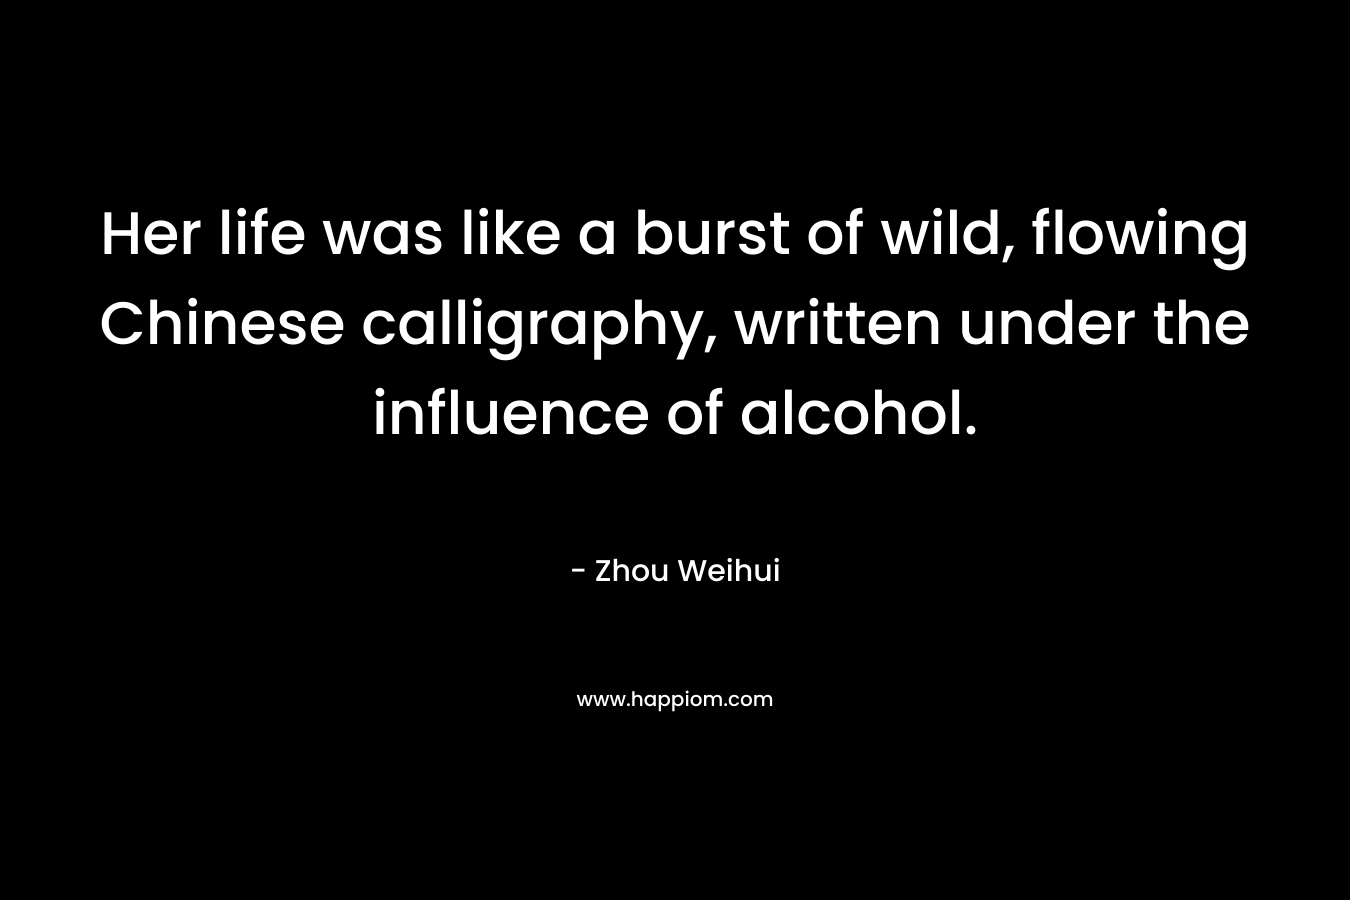 Her life was like a burst of wild, flowing Chinese calligraphy, written under the influence of alcohol. – Zhou Weihui